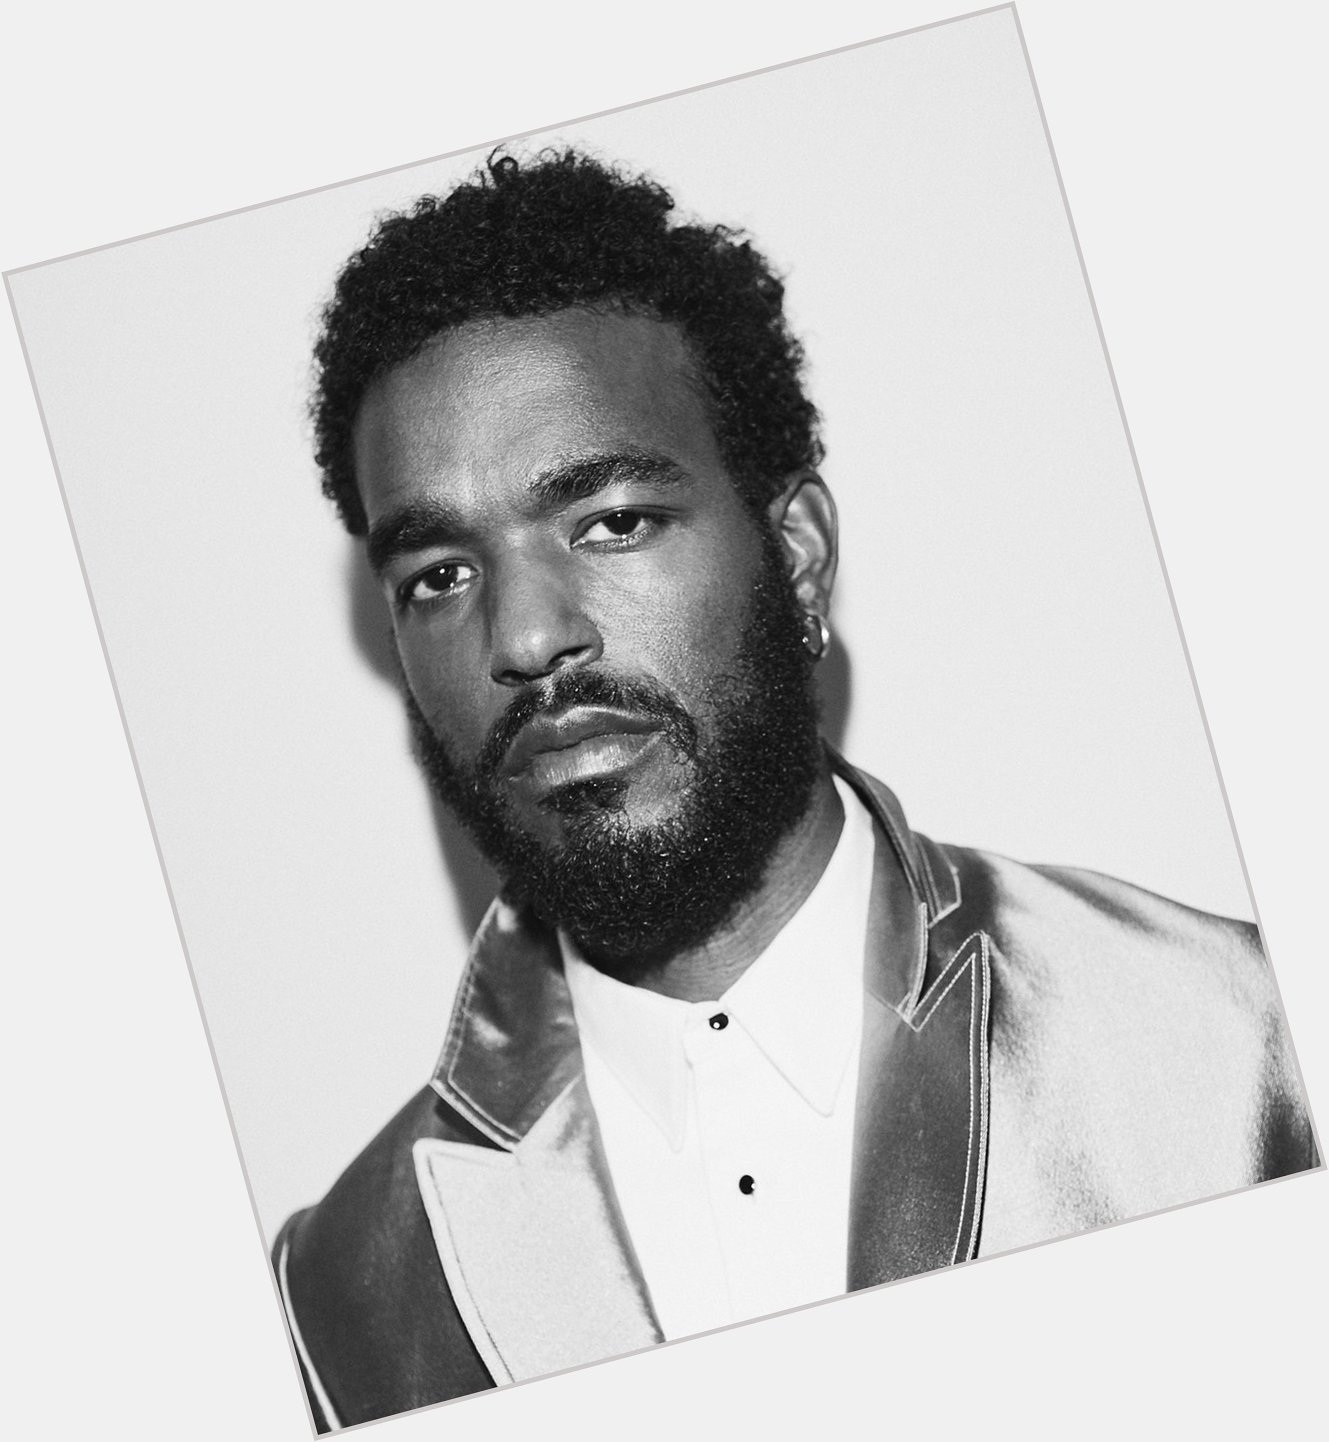 Happy Birthday to  What are your top 3 songs by Luke James? 